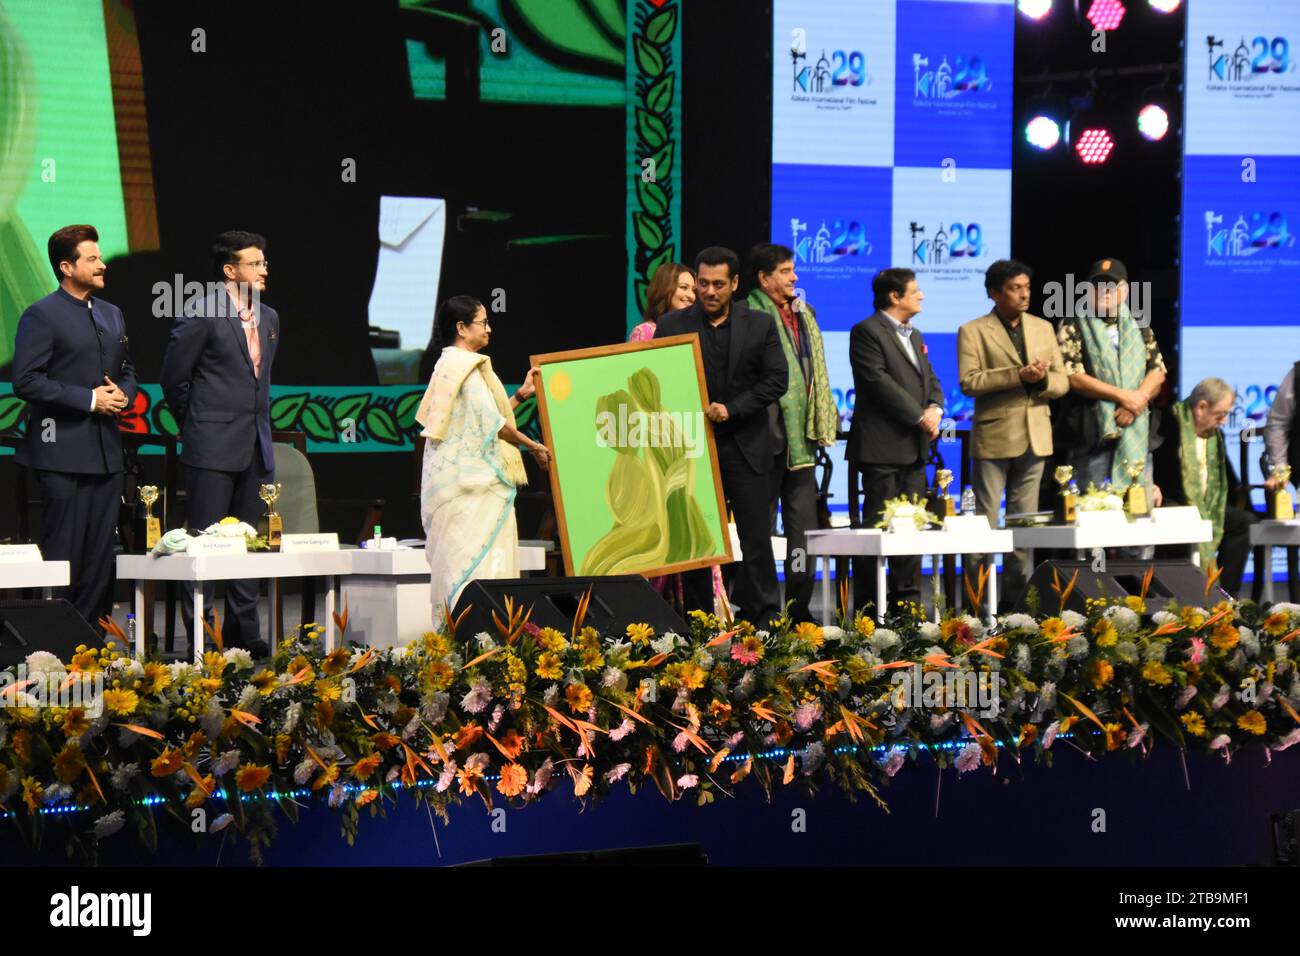 Kolkata, West Bengal, India. 5th Dec, 2023. Mamata Banerjee, Chief Minister of West Bengal, presenting her painting to Bollywood star actor Salman Khan at the iaugural function of the 29th edition of the Kolkata International Film Festival (KIFF 29), organized by the Information and Cultural Affairs Department, Government of West Bengal, which is scheduled to be held between 5 - 12 December, 2023 in Kolkata, the cultural capital of the State of West Bengal. this festival is accredited by the International Federation of Film Producers' Association or FIAPF. (Credit Image: © Biswarup Ganguly/ Stock Photo